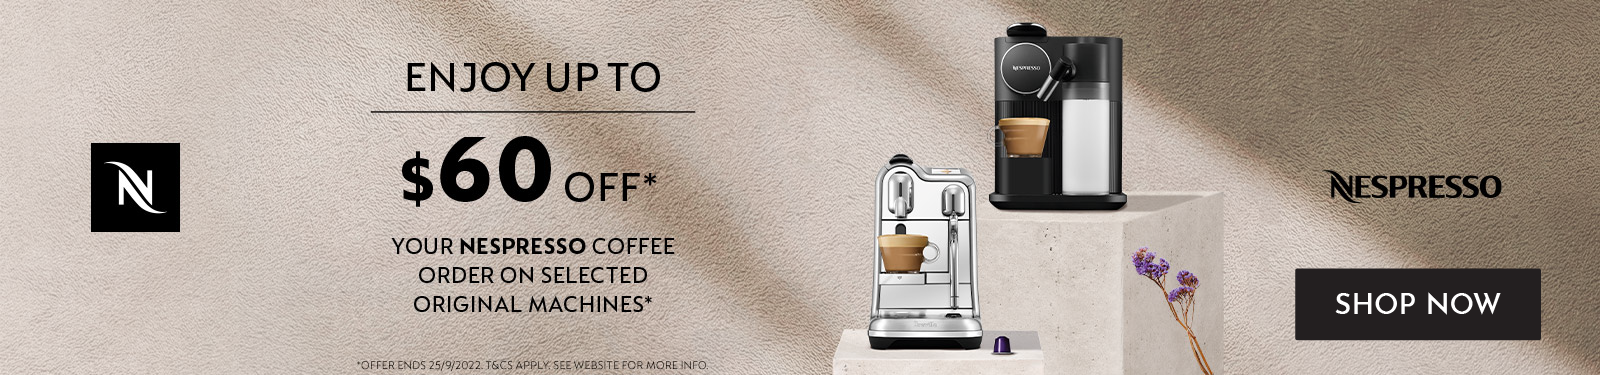 Enjoy Up To $60 Off* Your Nespresso Coffee Order